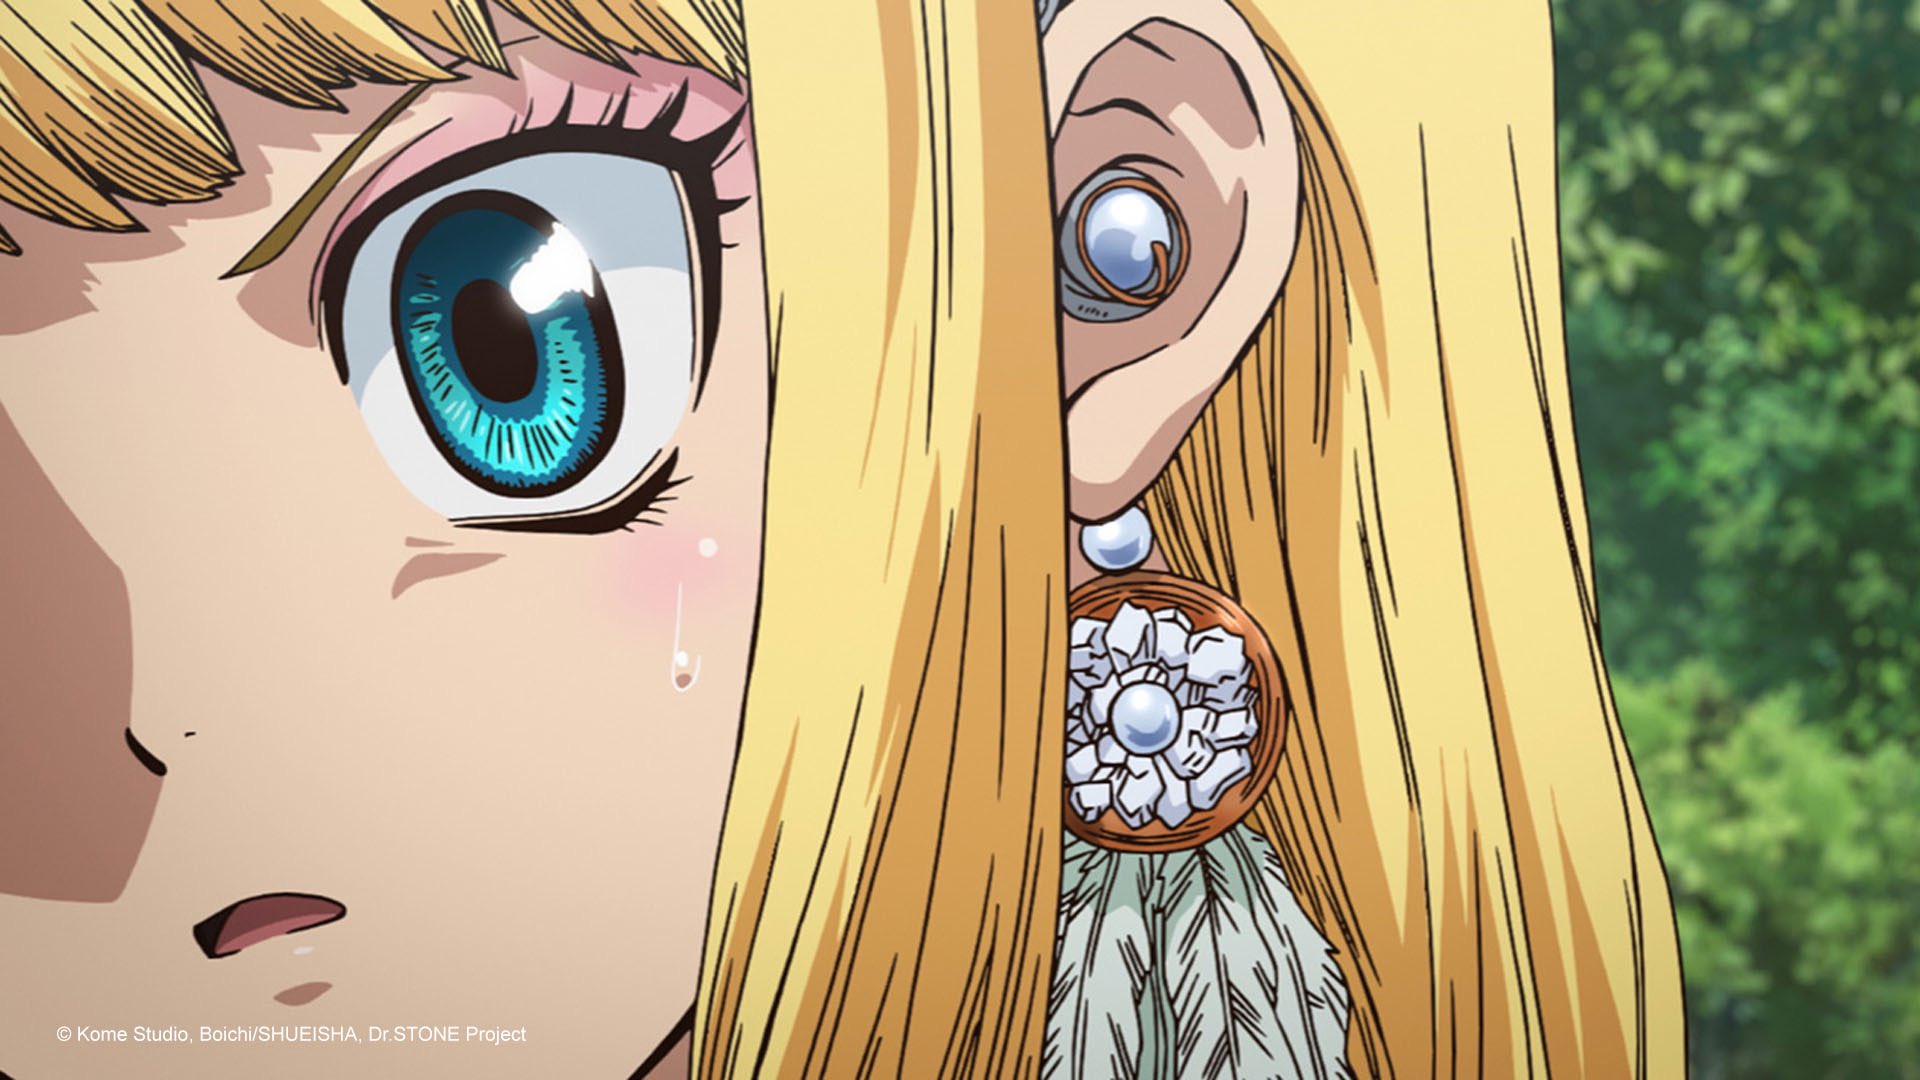 One month left until Dr.STONE NEW WORLD (Season 3) Part 2! Are you Excited!  🧪 ✨More: - Thread from AnimeTV チェーン @animetv_jp - Rattibha